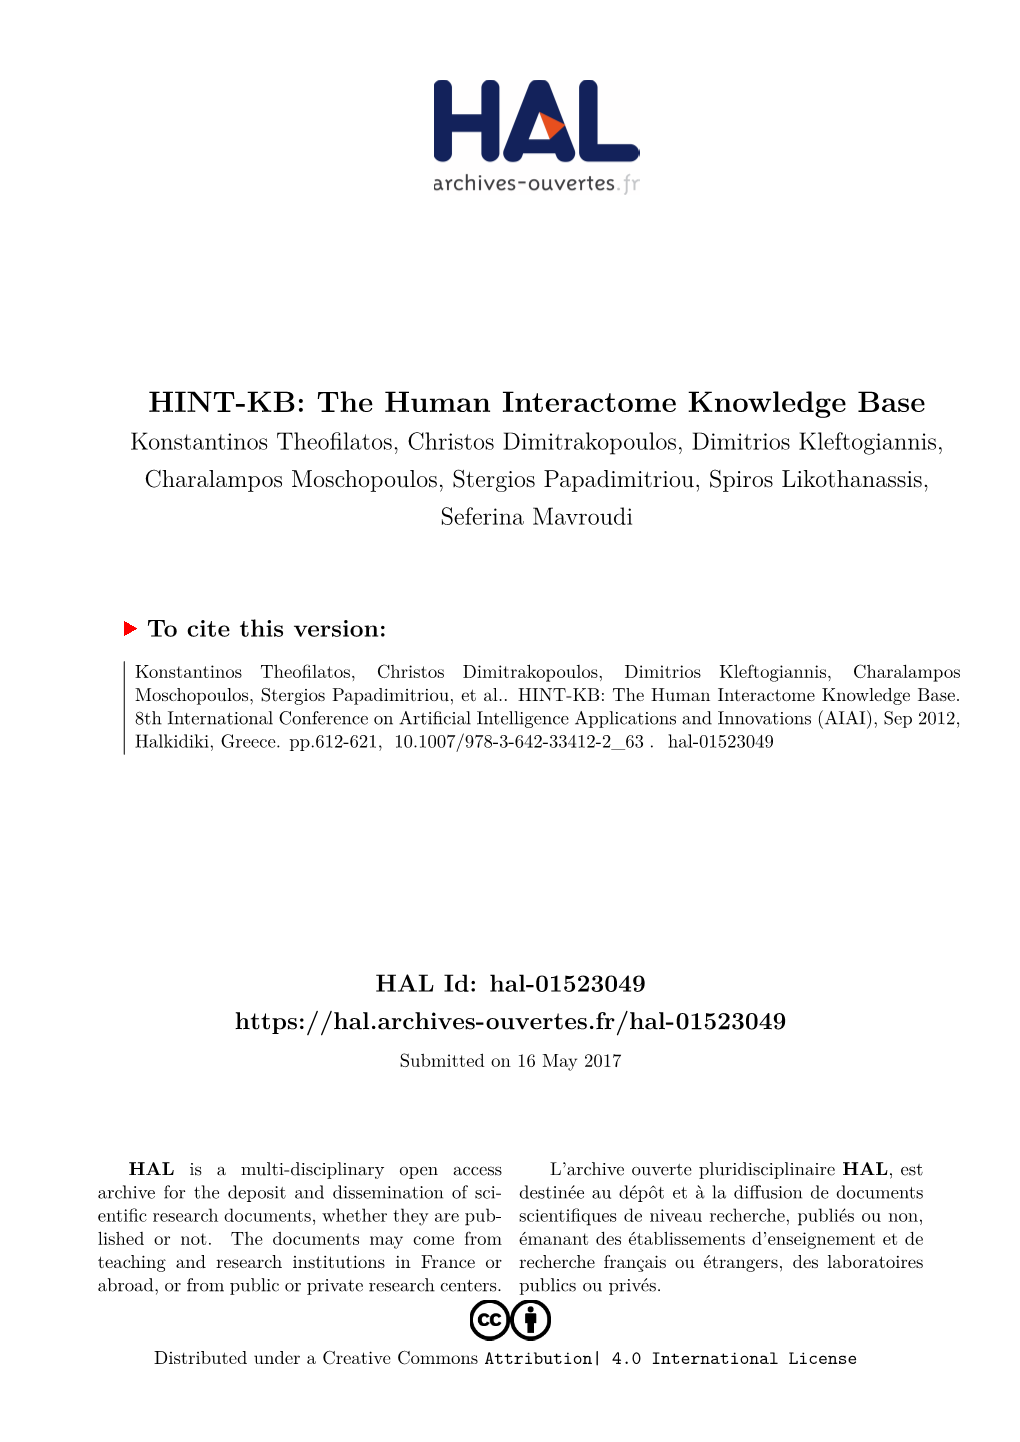 The Human Interactome Knowledge Base